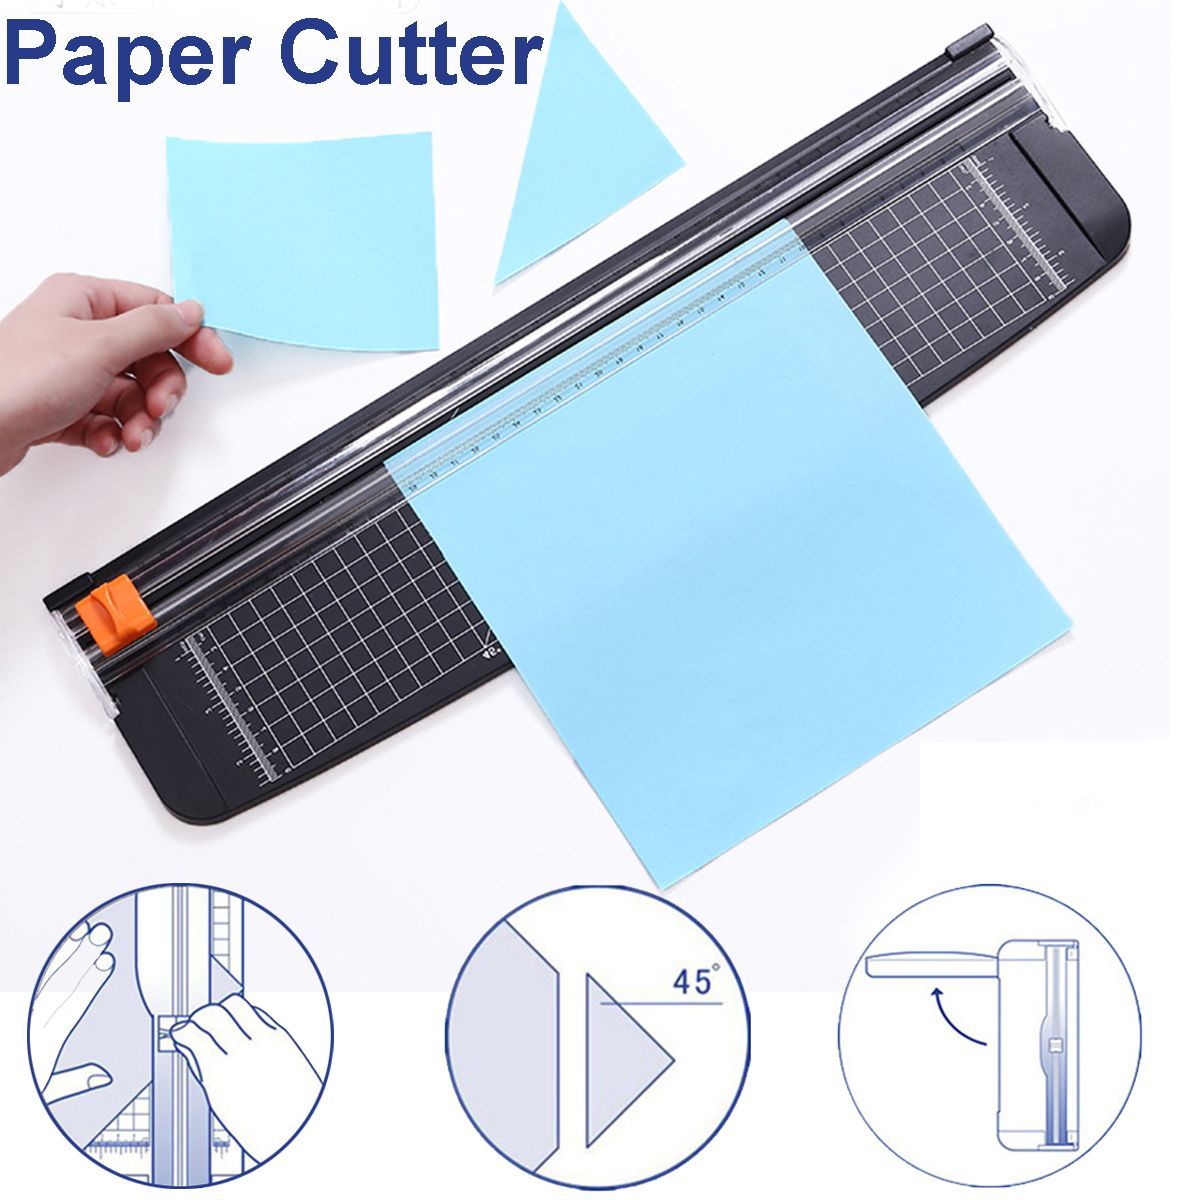 12inch-A3-Paper-Cutter-Plastic-Base-Guillotine-Page-Photo-Trimmer-Scrap-Booking-1631677